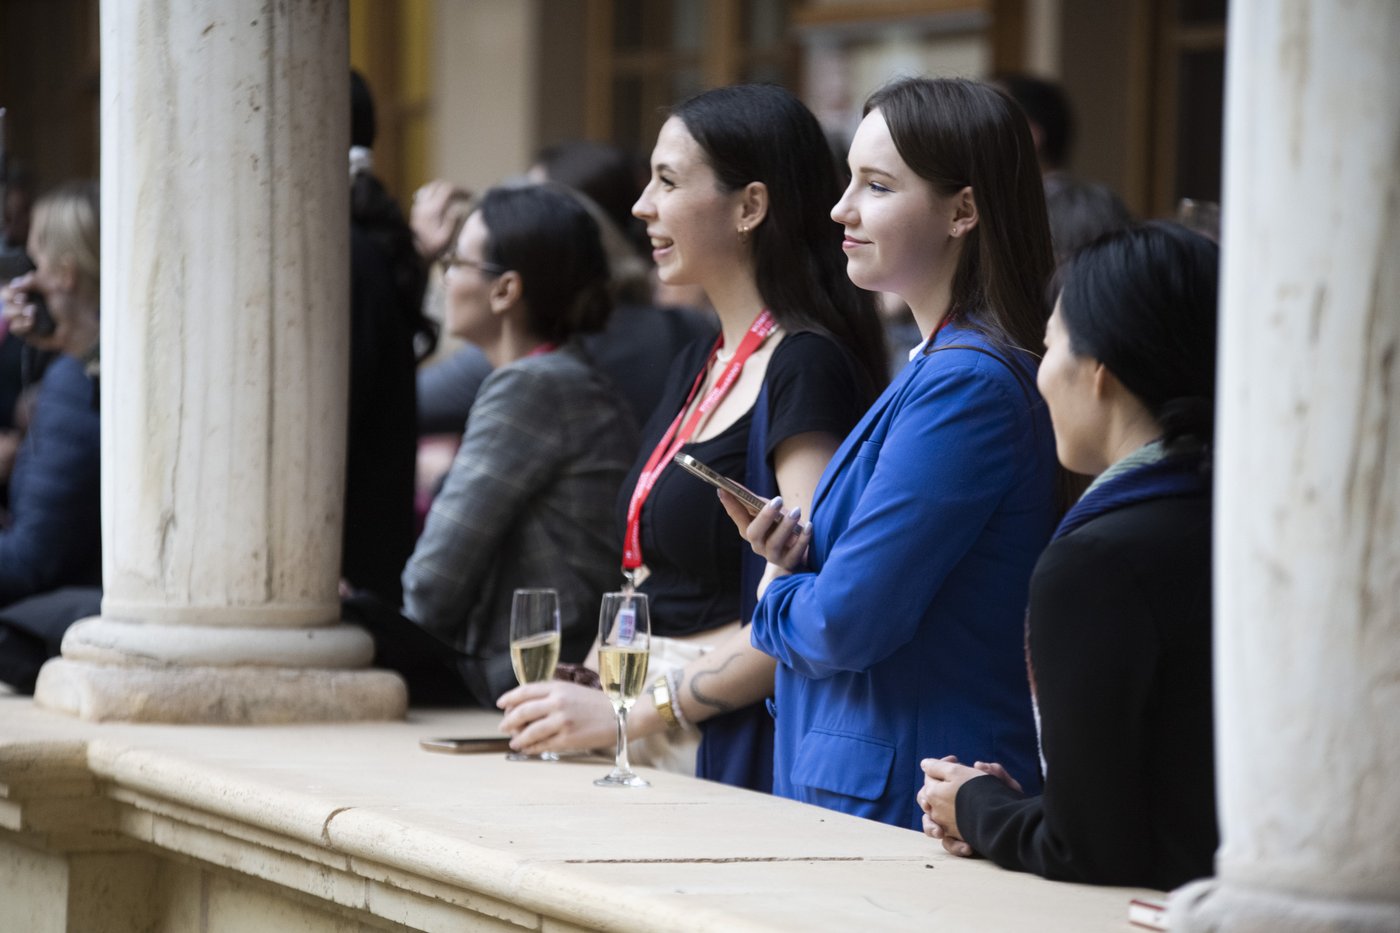 A few individuals engaged in conversation by a balcony, holding glasses of champagne, at a social or networking event.